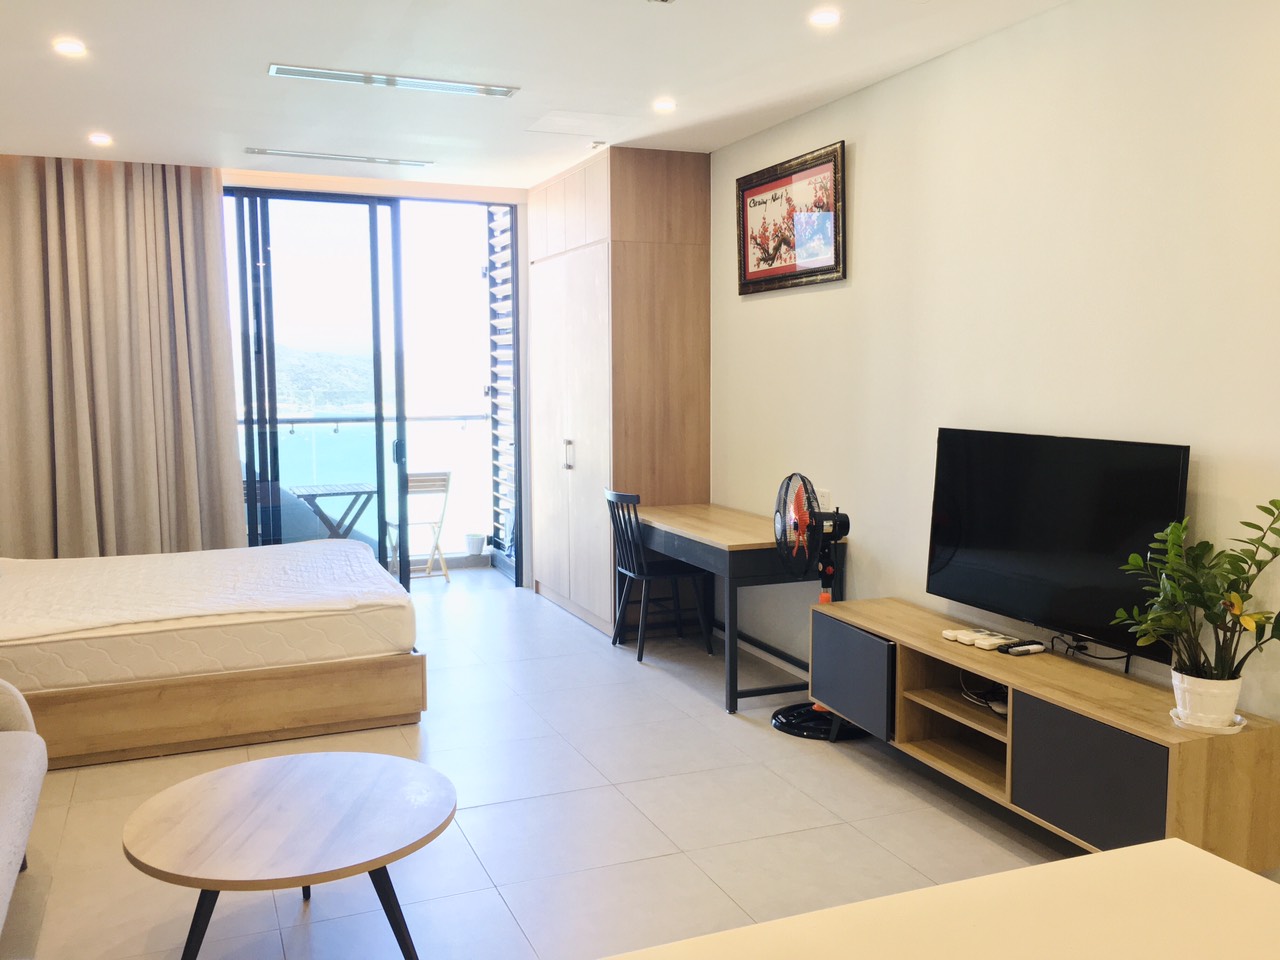 Scenia Bay Nha Trang for rent | One bedroom plus | Sea view towards the Marina and Co Tien mountain | 15 million